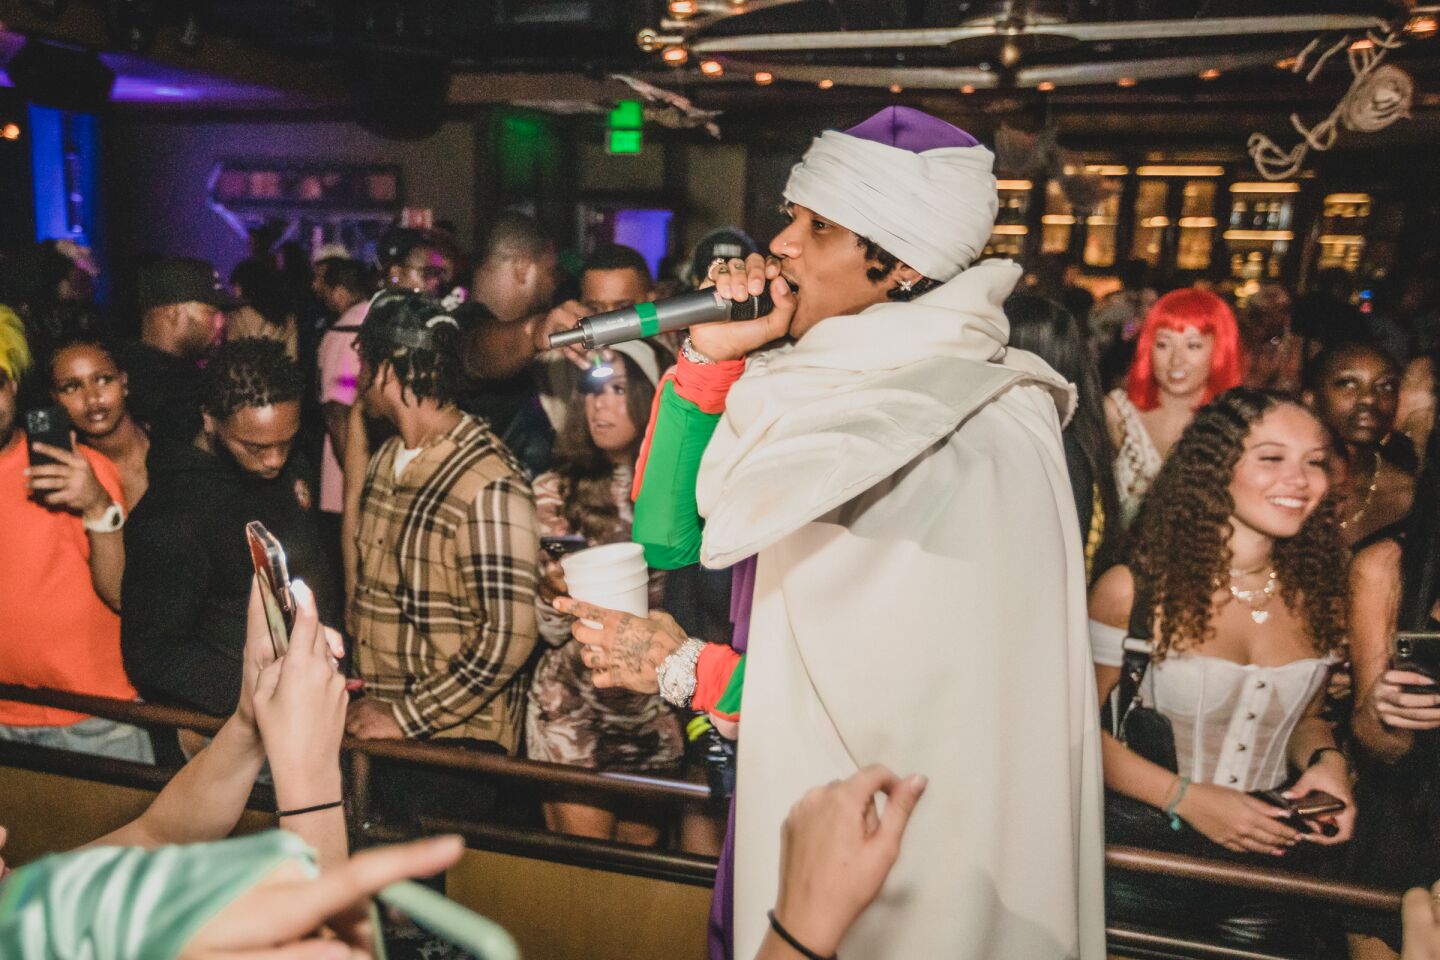 Grammy-nominated rapper Swae Lee put on a show for the crowd at Oxford Social Club on Halloween night, Oct. 31, 2021.